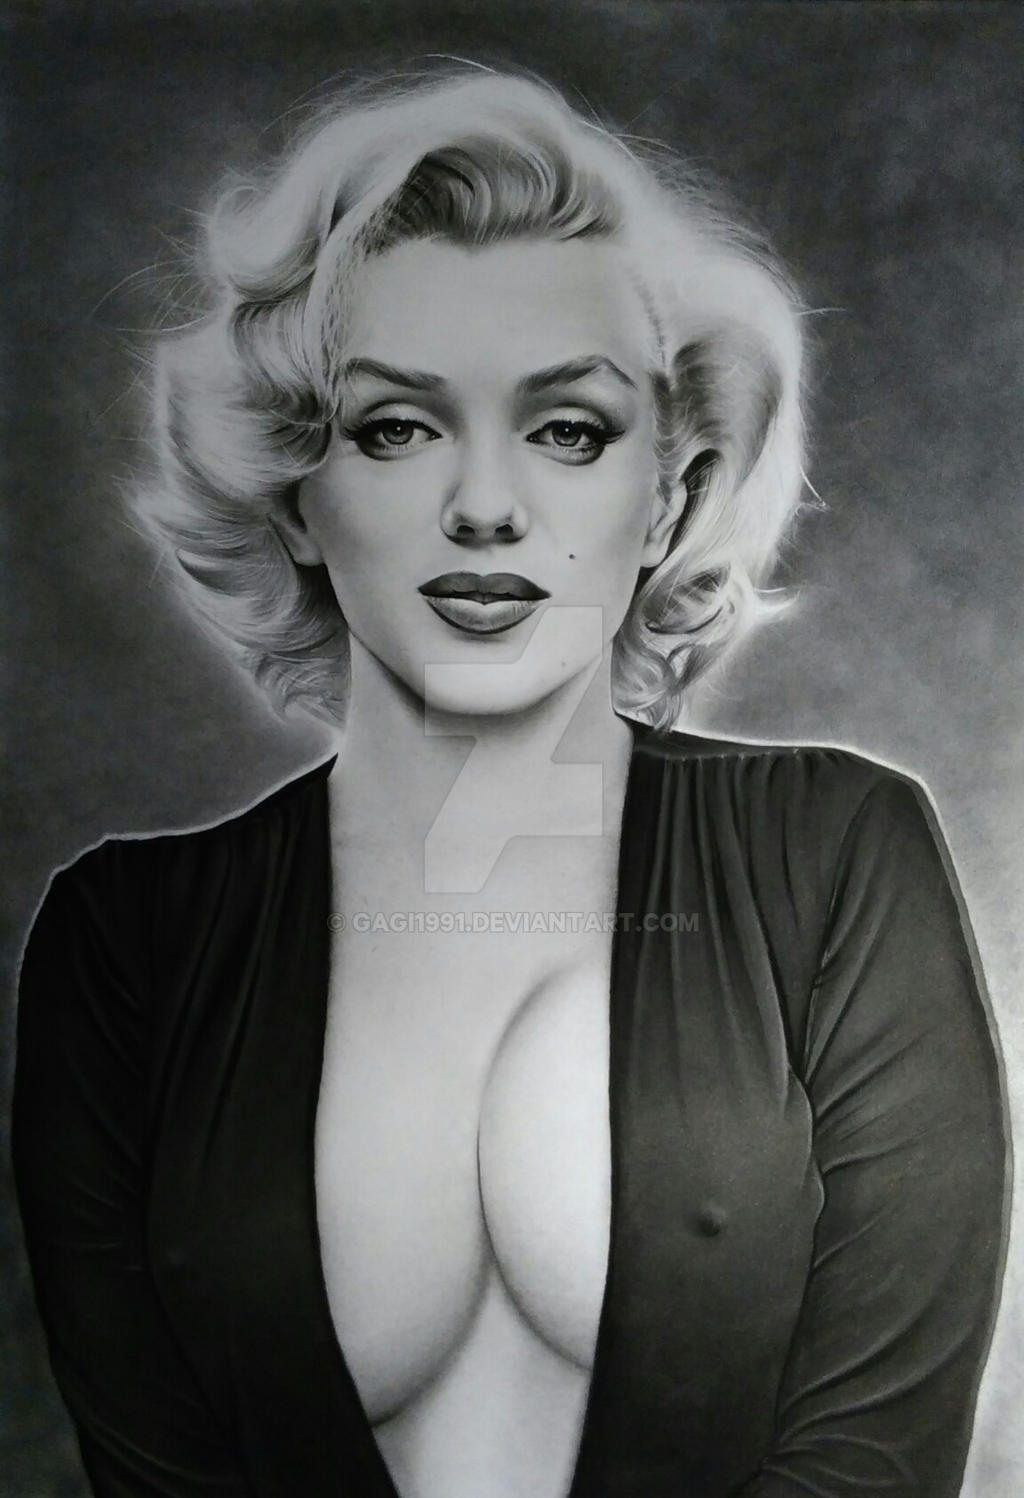 Monroe pictures marilyn sexy Photos: The